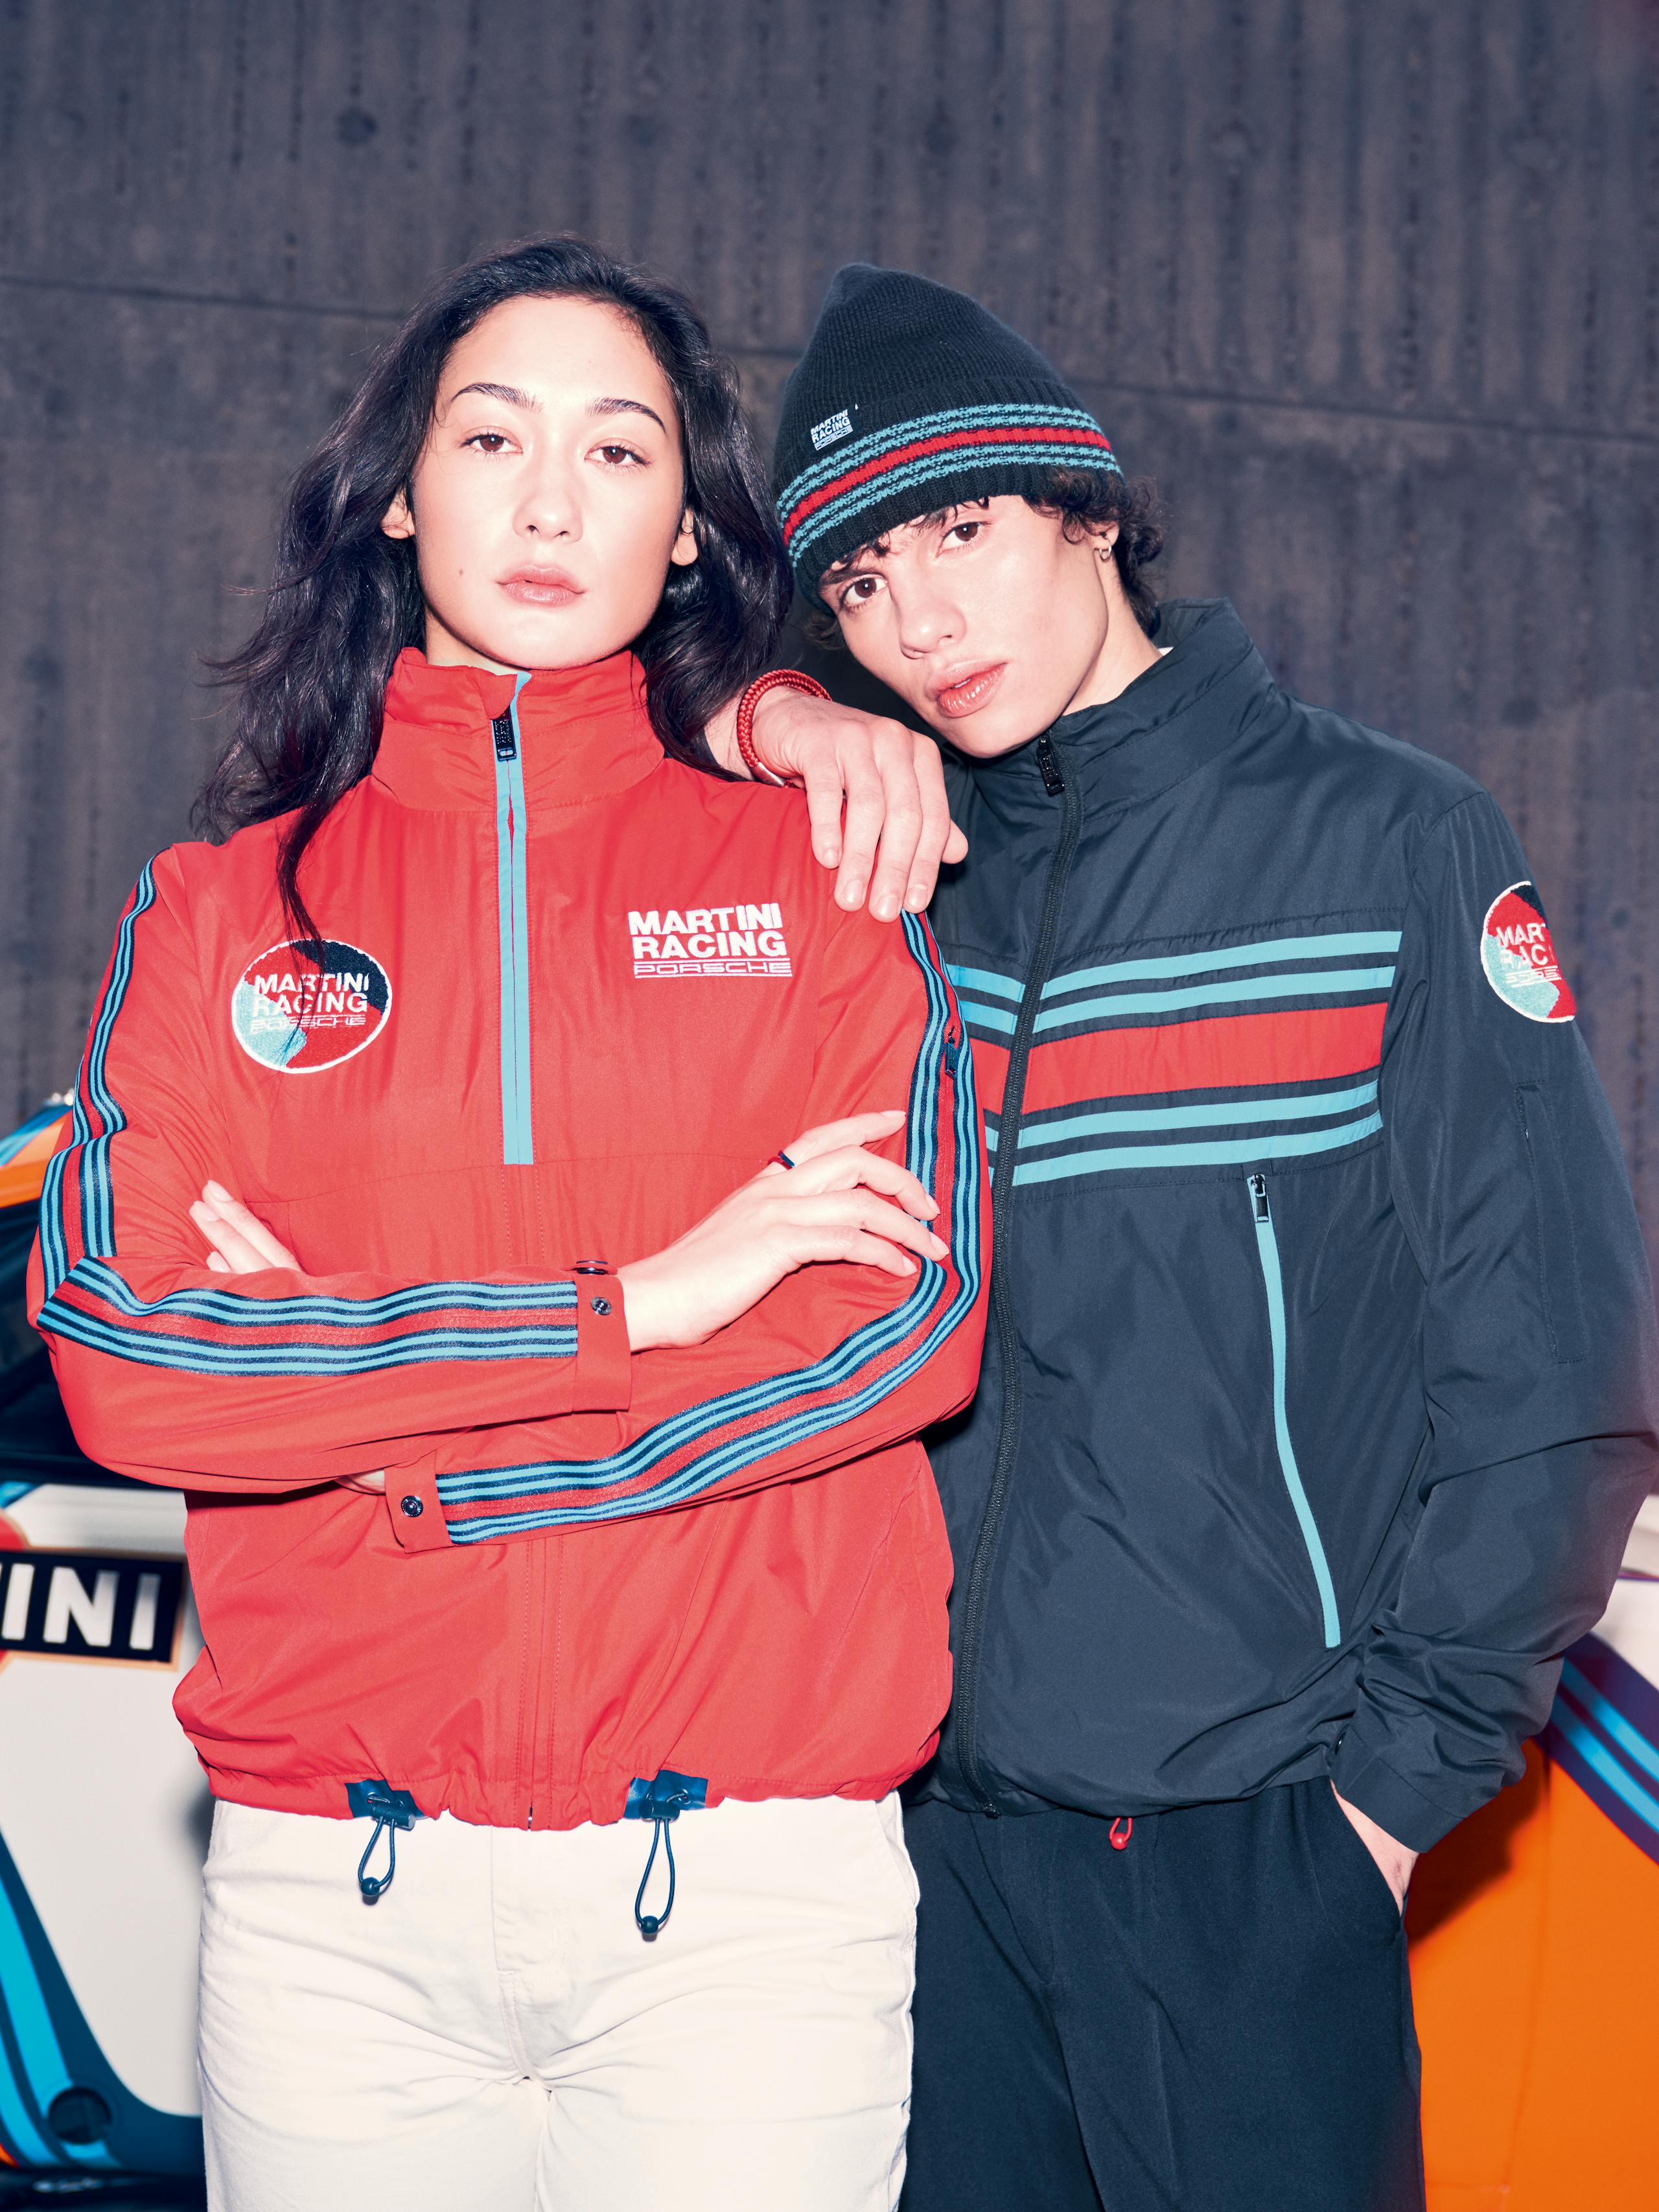 A woman and a man stand next to each other wearing Porsche MARTINI RACING jackets and a basket